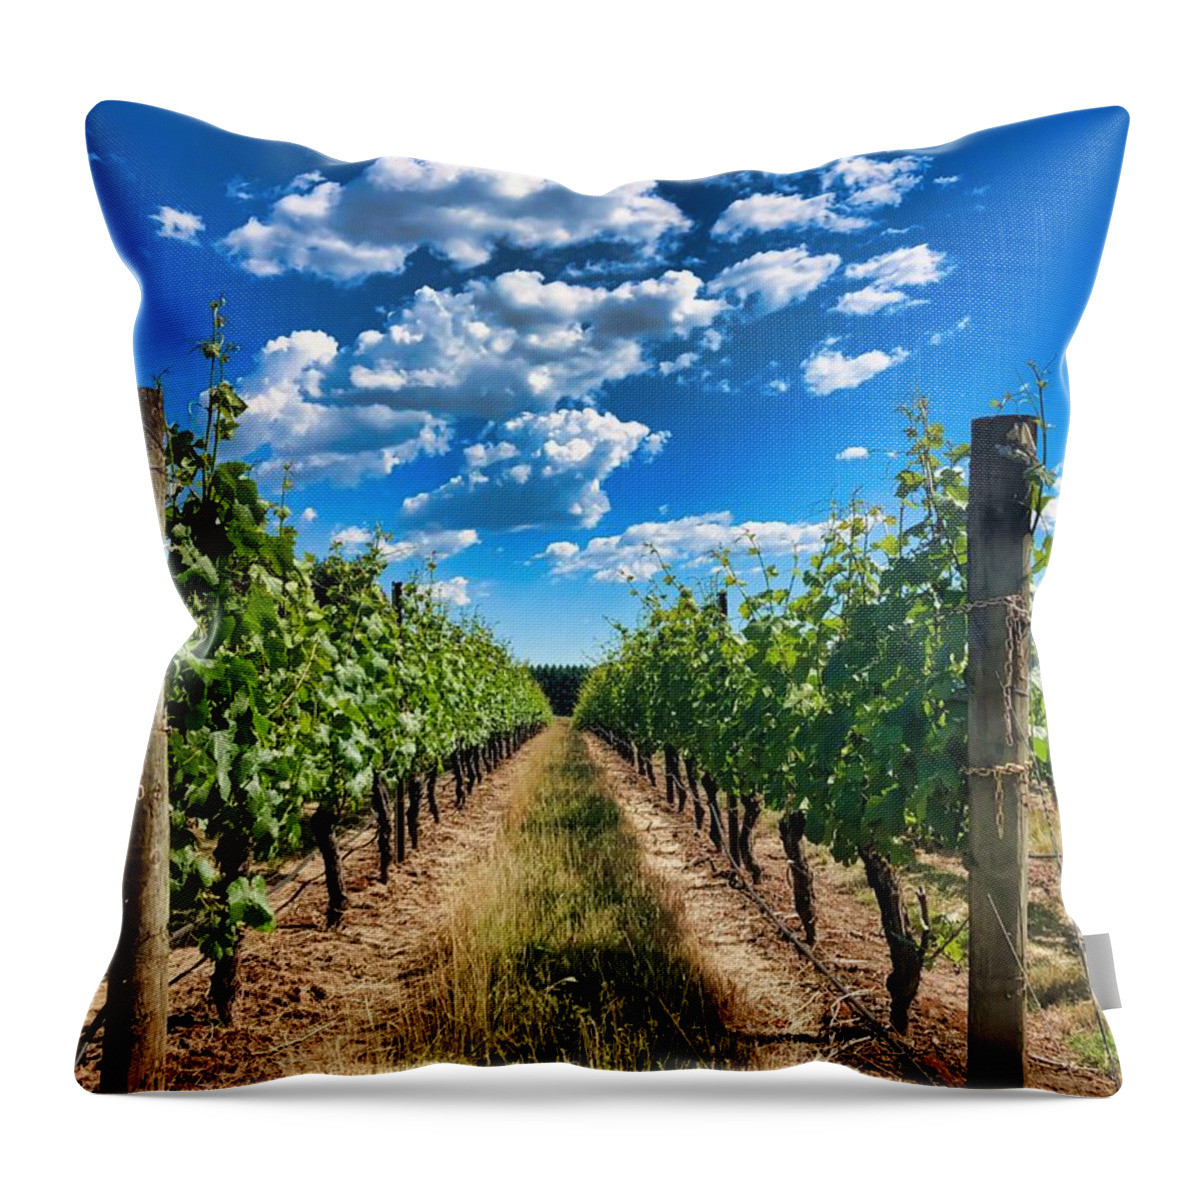 Vineyard Throw Pillow featuring the photograph In The Vineyard by Brian Eberly